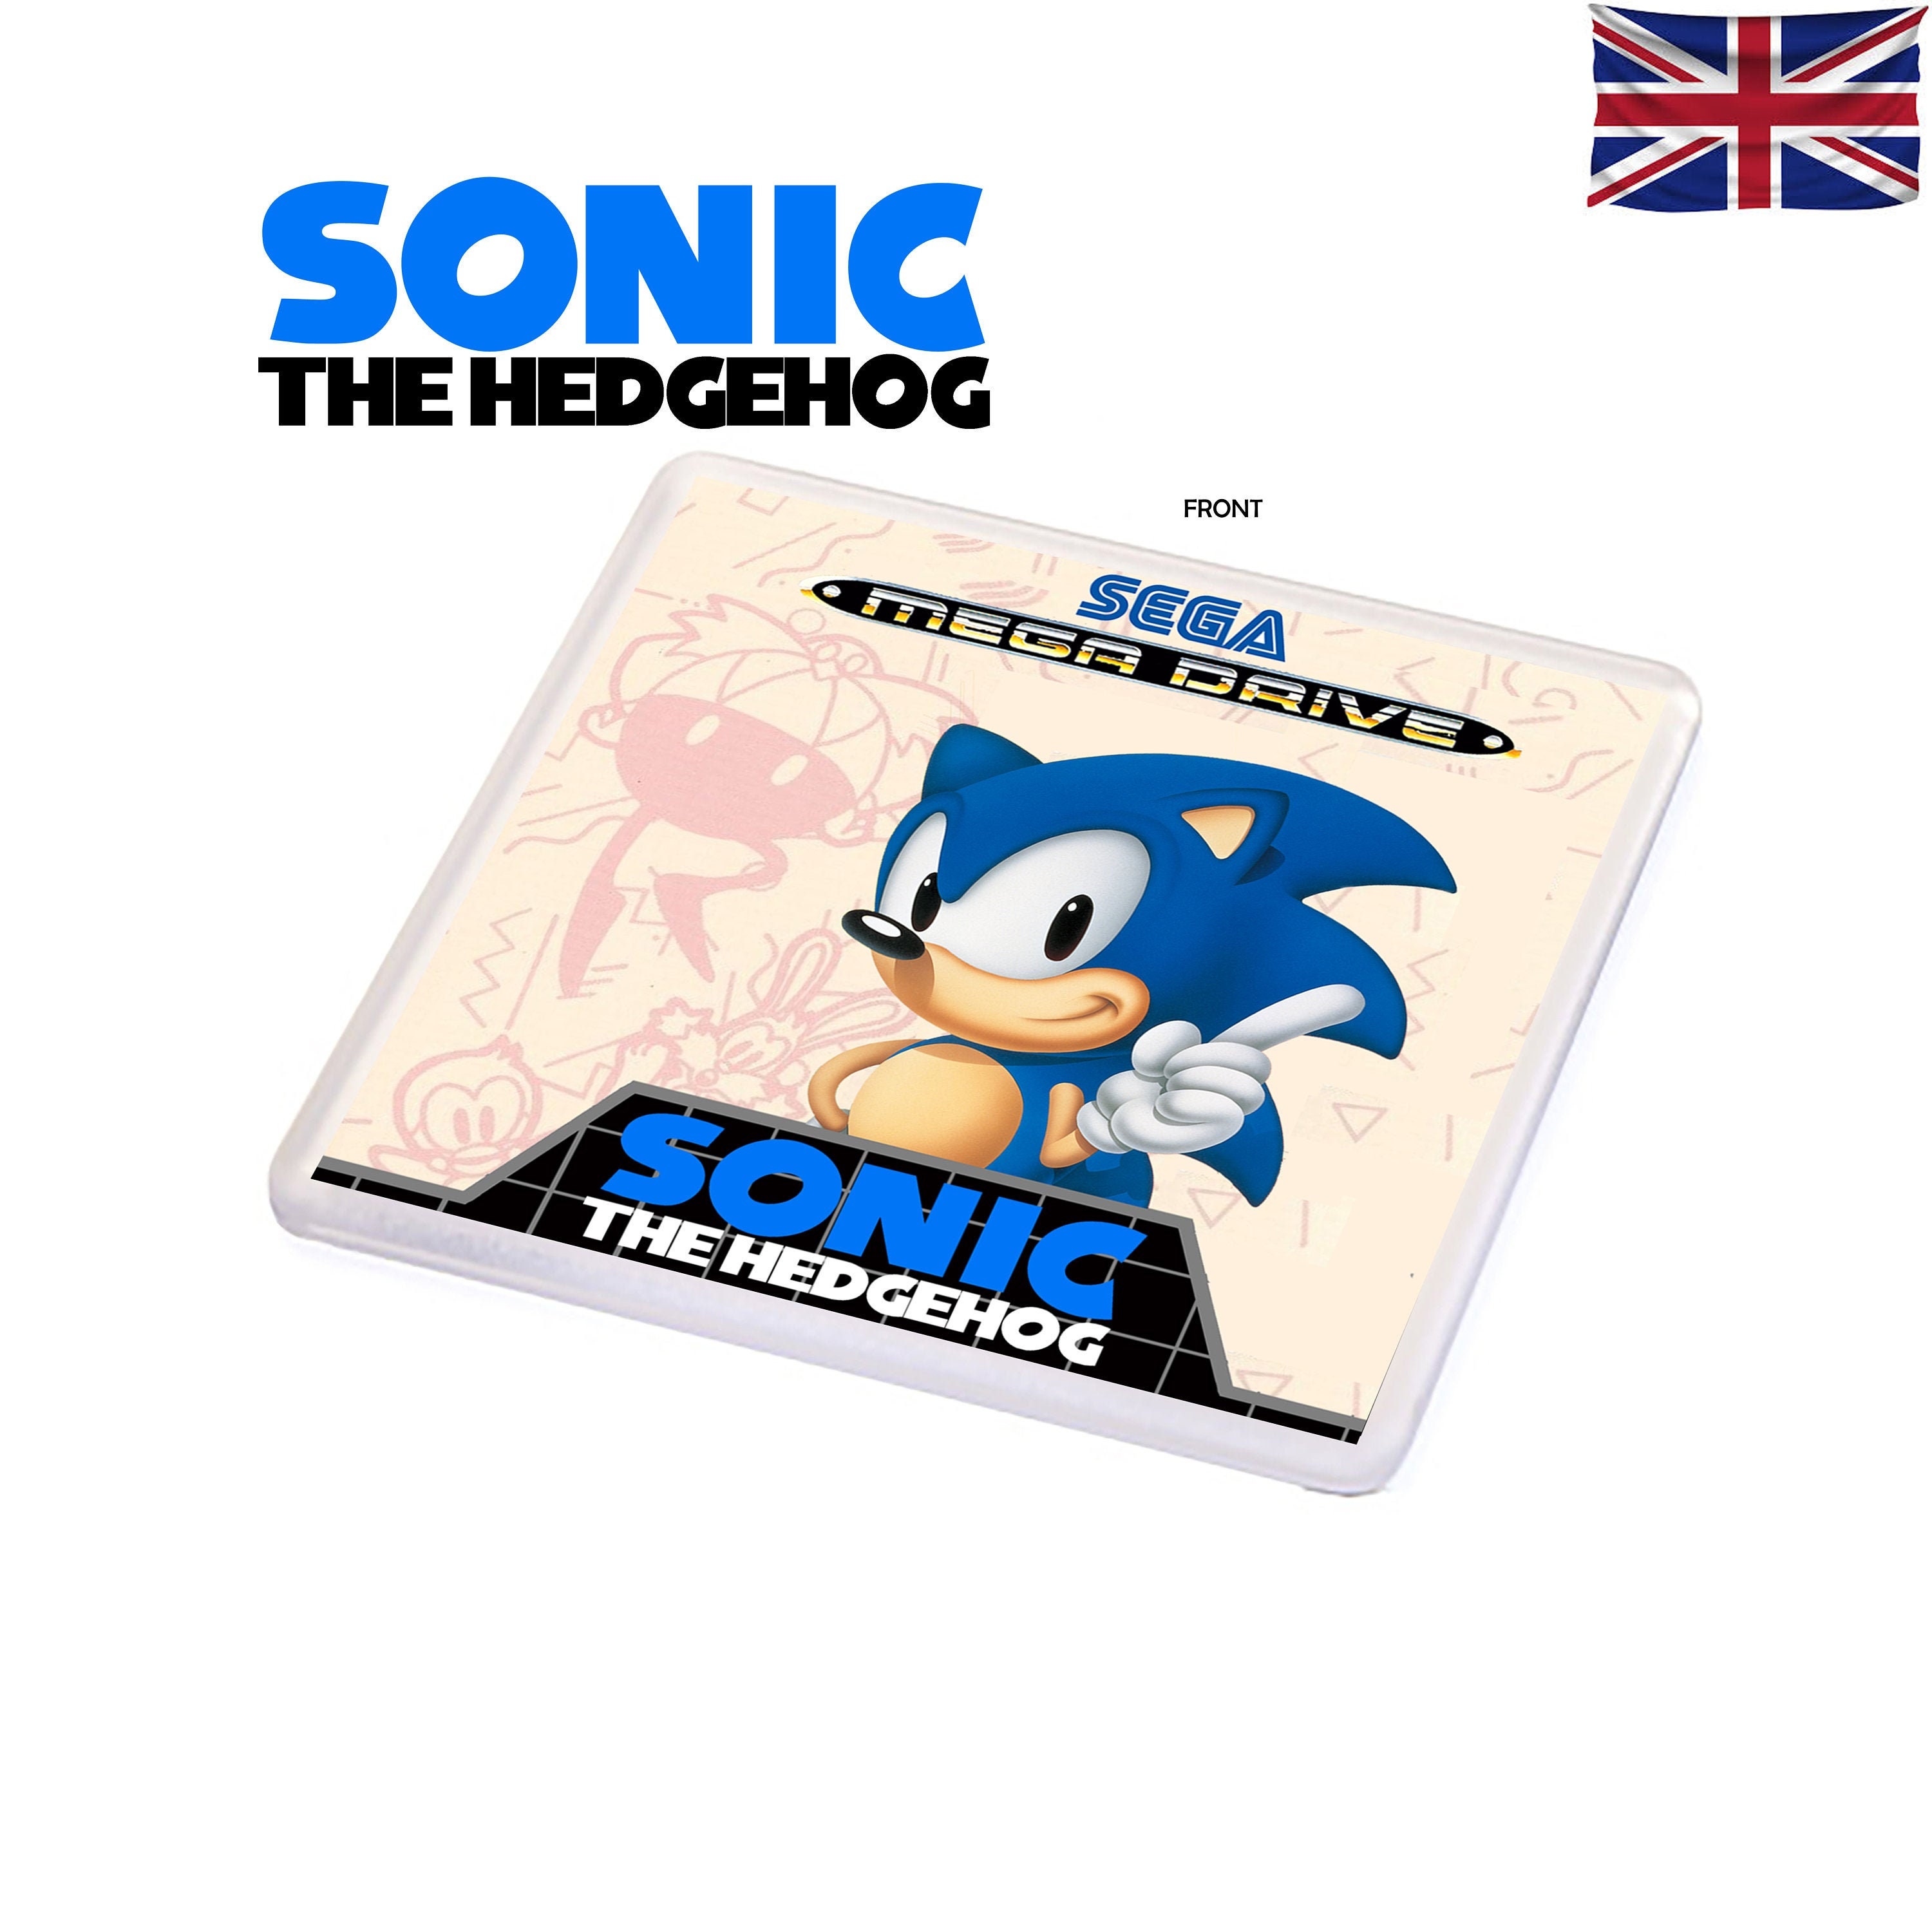 Sonic the Hedgehog (X360) - The Cover Project